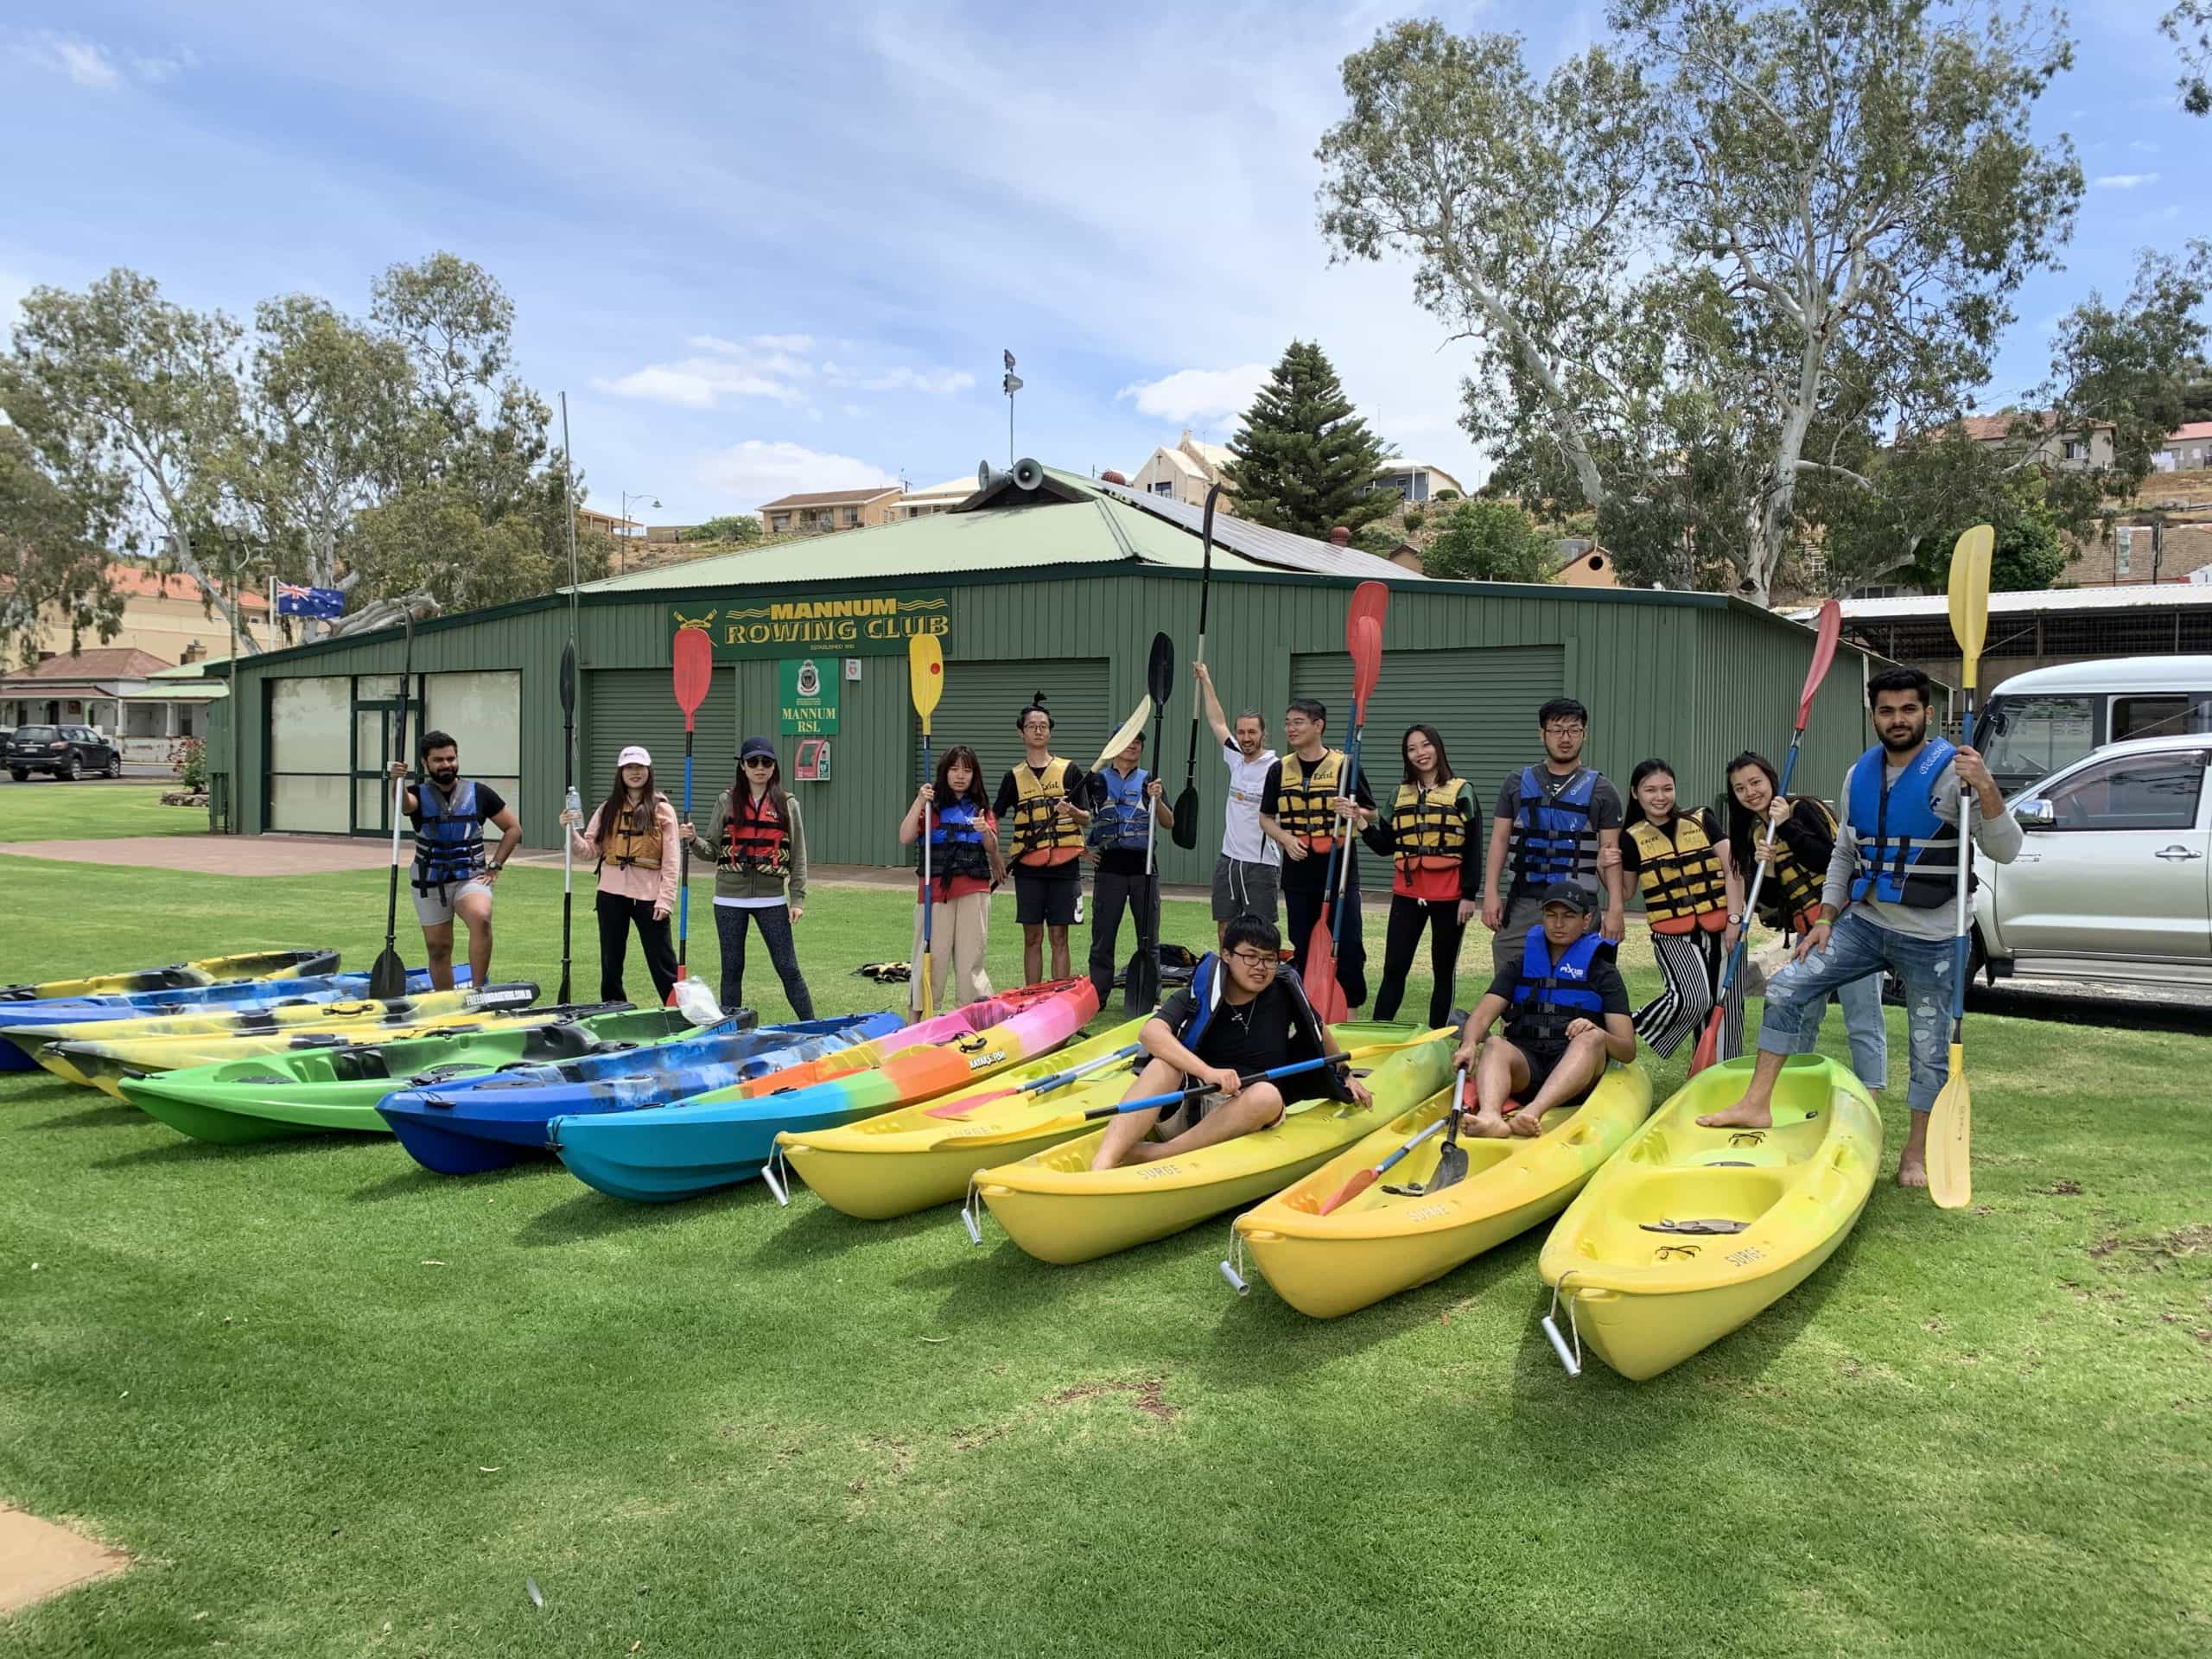 Students with kayaks on the grass